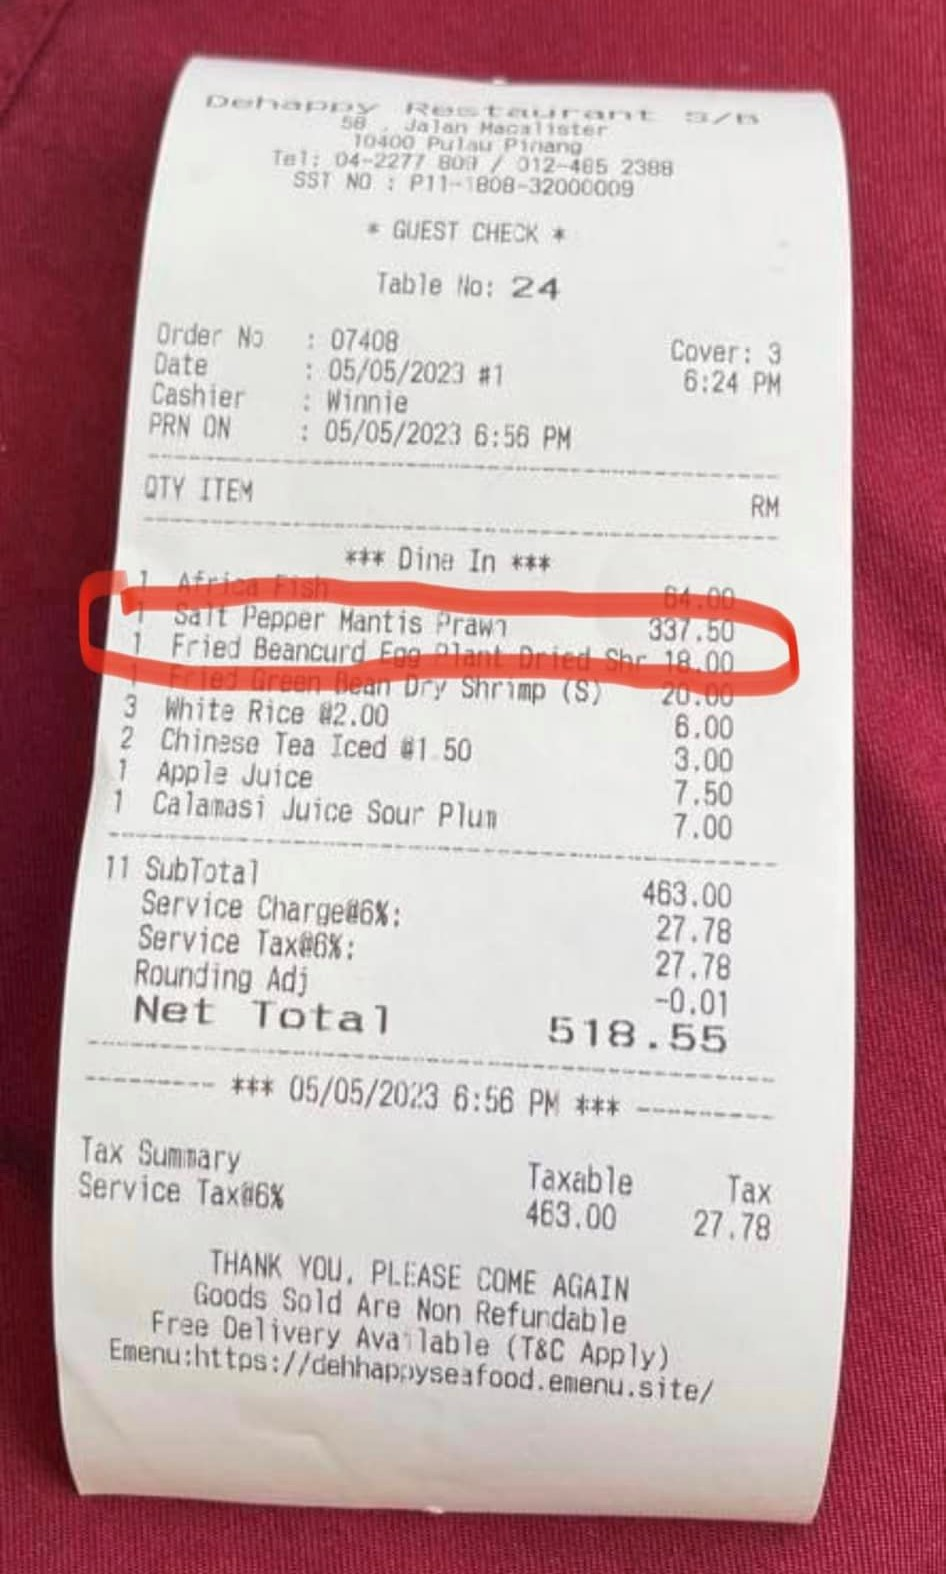 M'sian shocked over being charged rm337 for 3 mantis prawns, restaurant owner says price was clearly stated